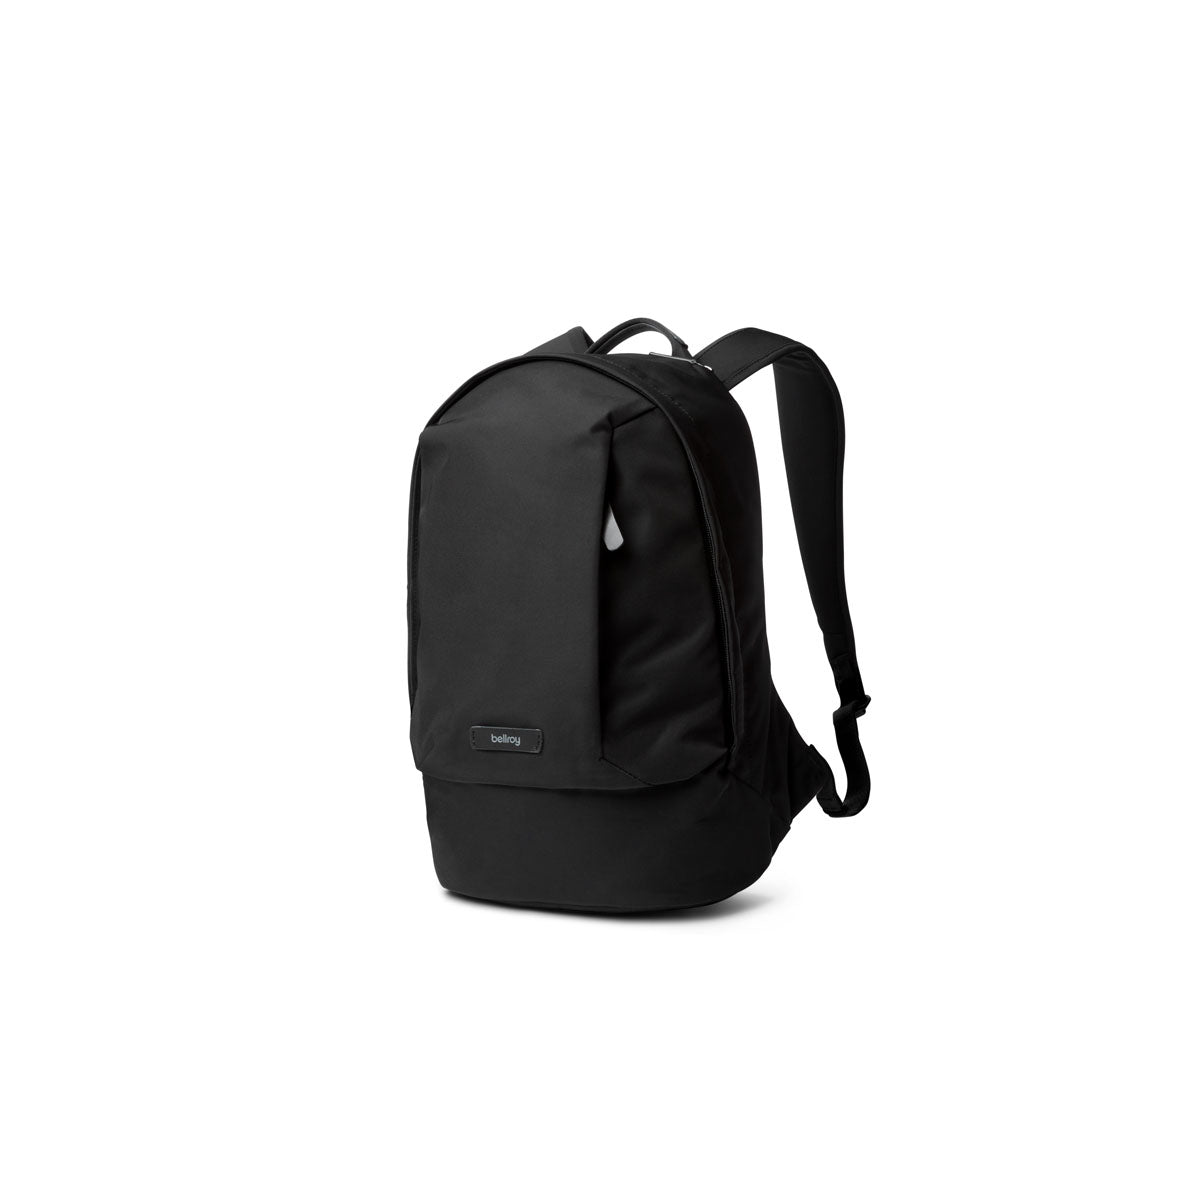 The Classic Backpack Compact: Black on display.